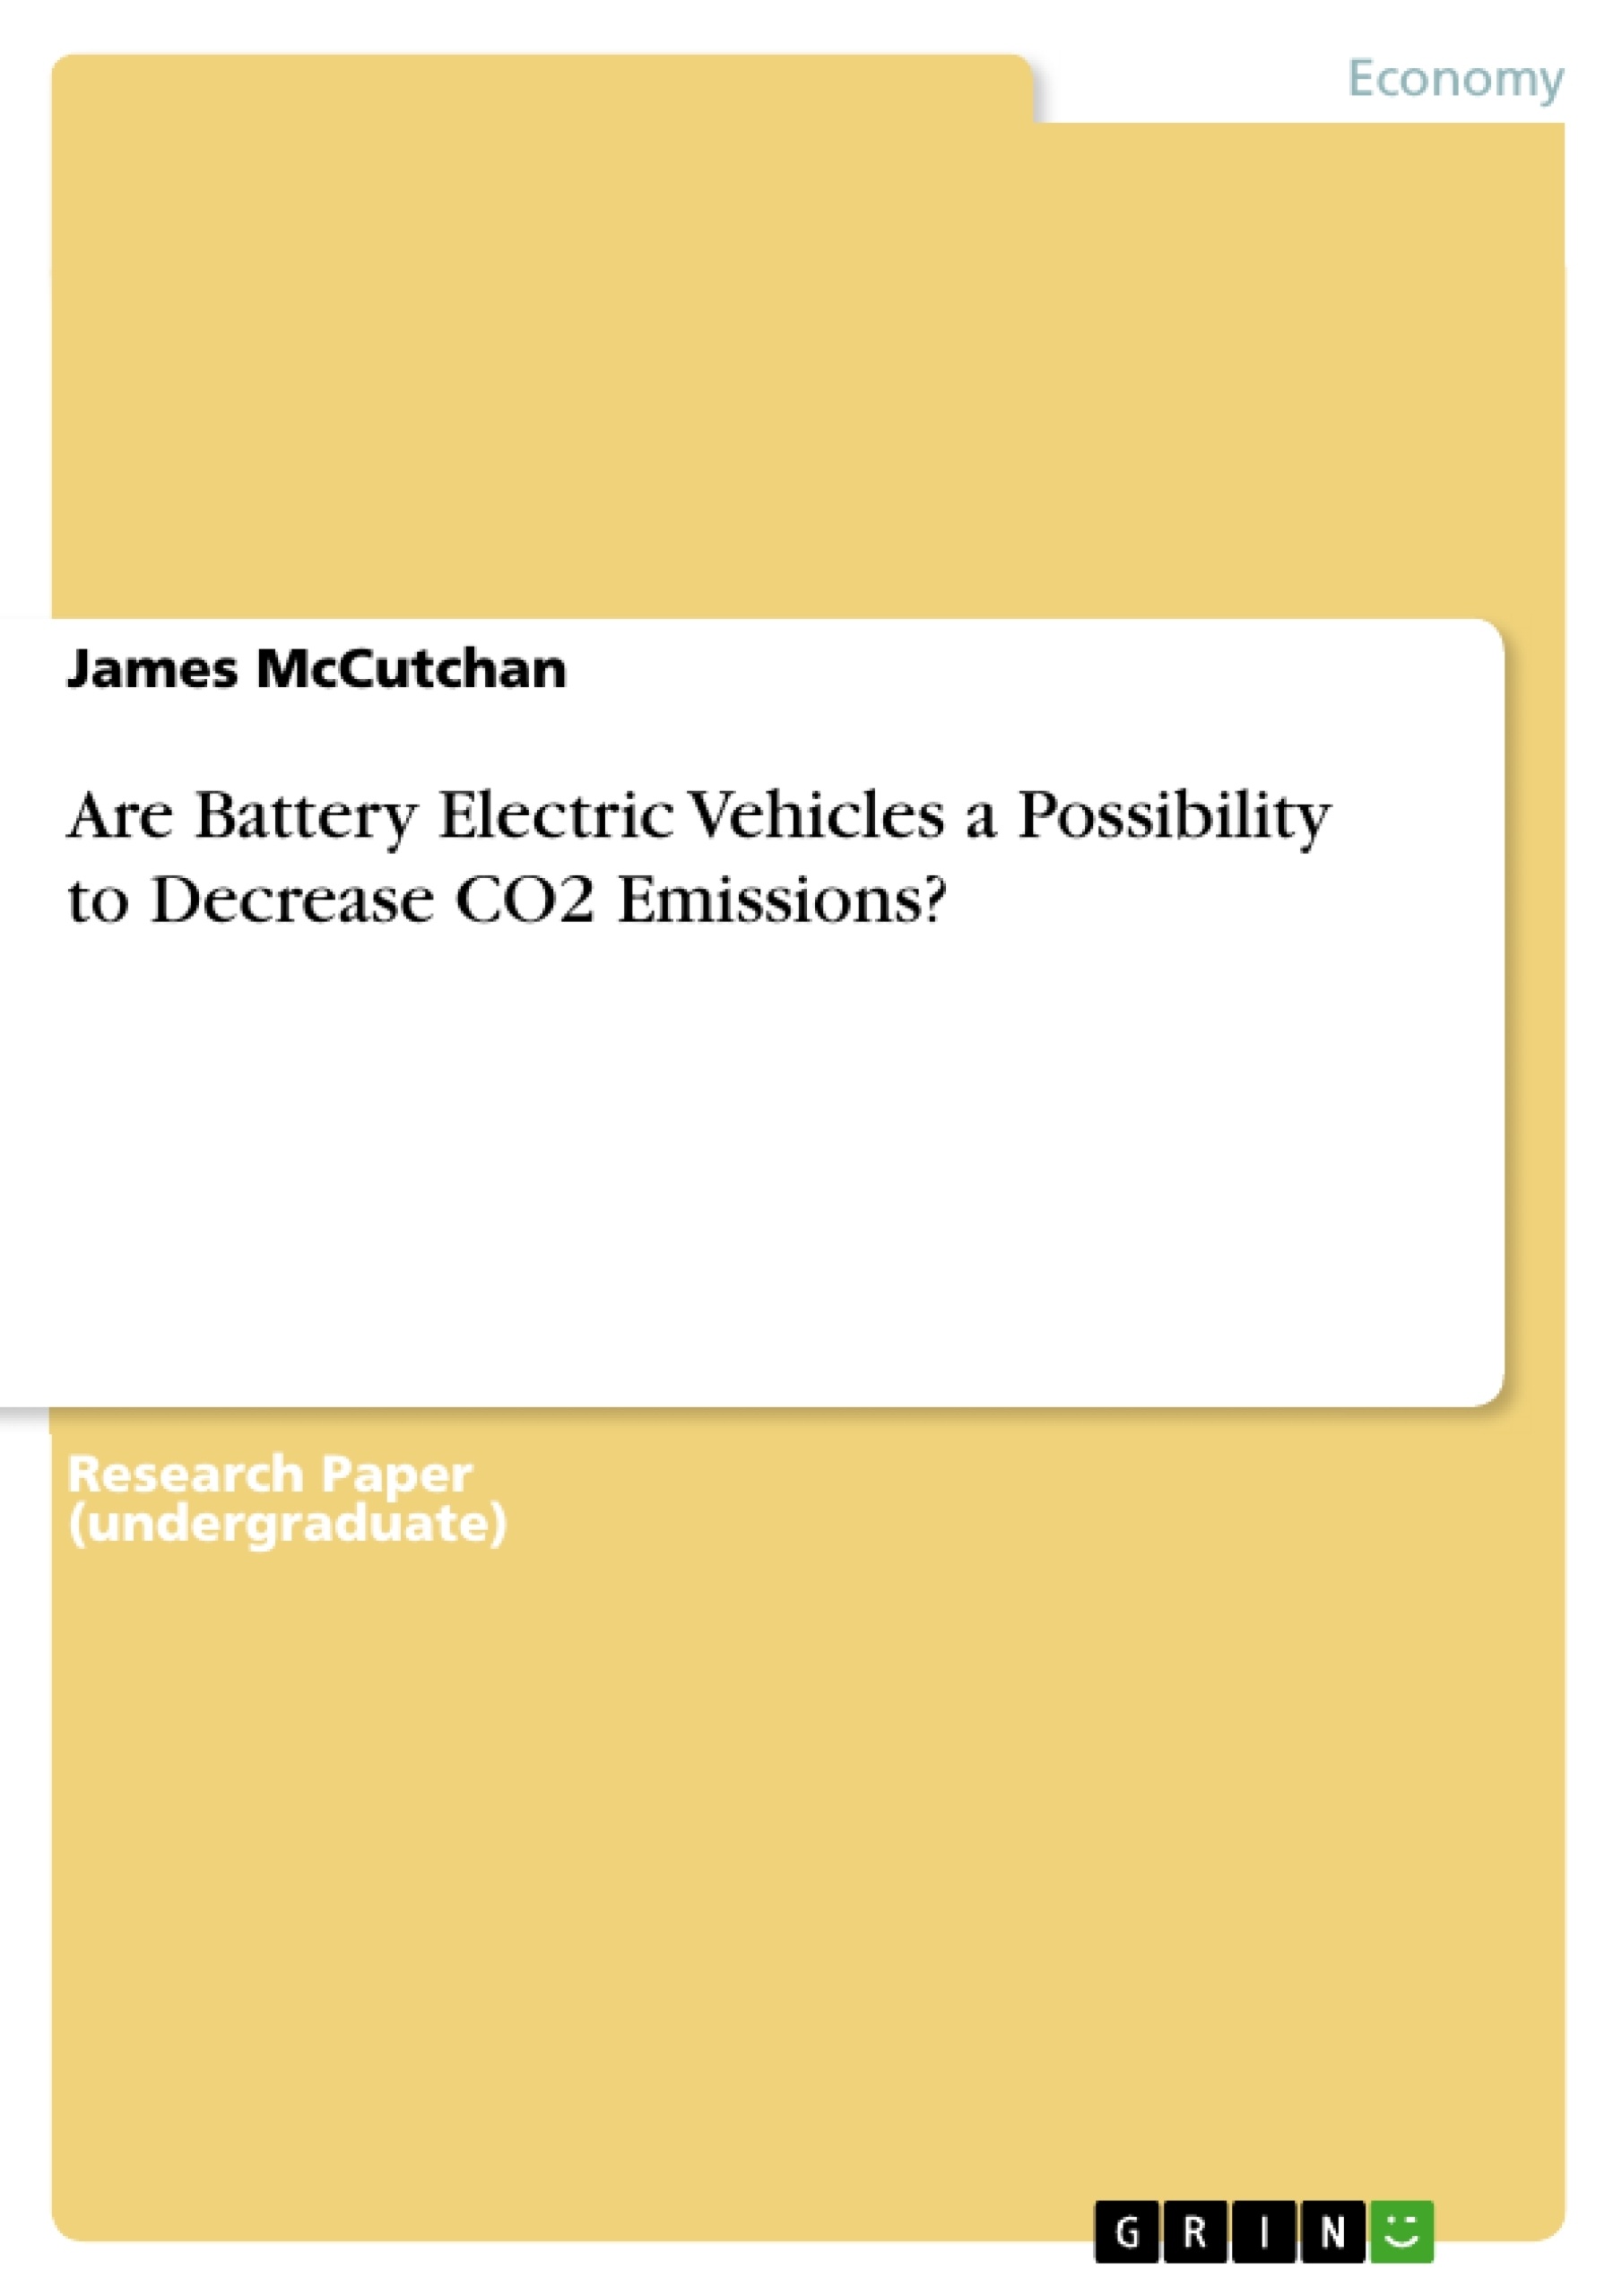 Title: Are Battery Electric Vehicles a Possibility to Decrease CO2 Emissions?